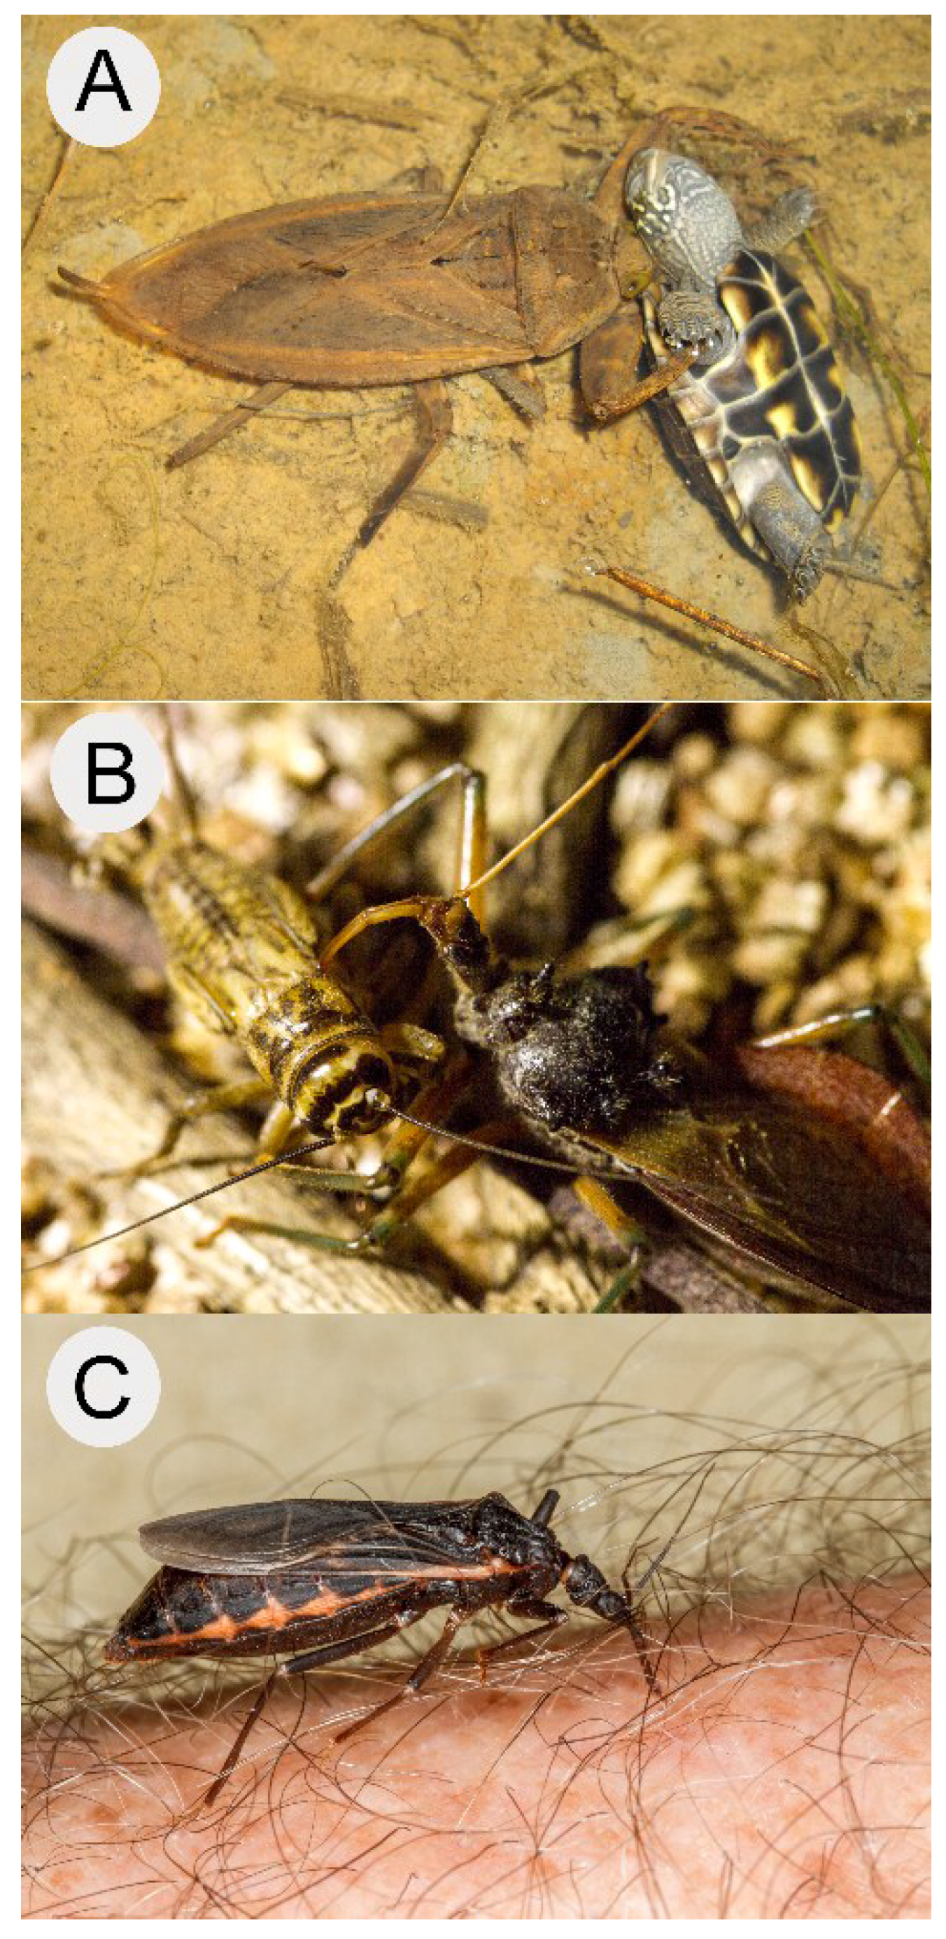 Toxins | Free Full-Text | Venoms of Heteropteran Insects: A Treasure Trove  of Diverse Pharmacological Toolkits